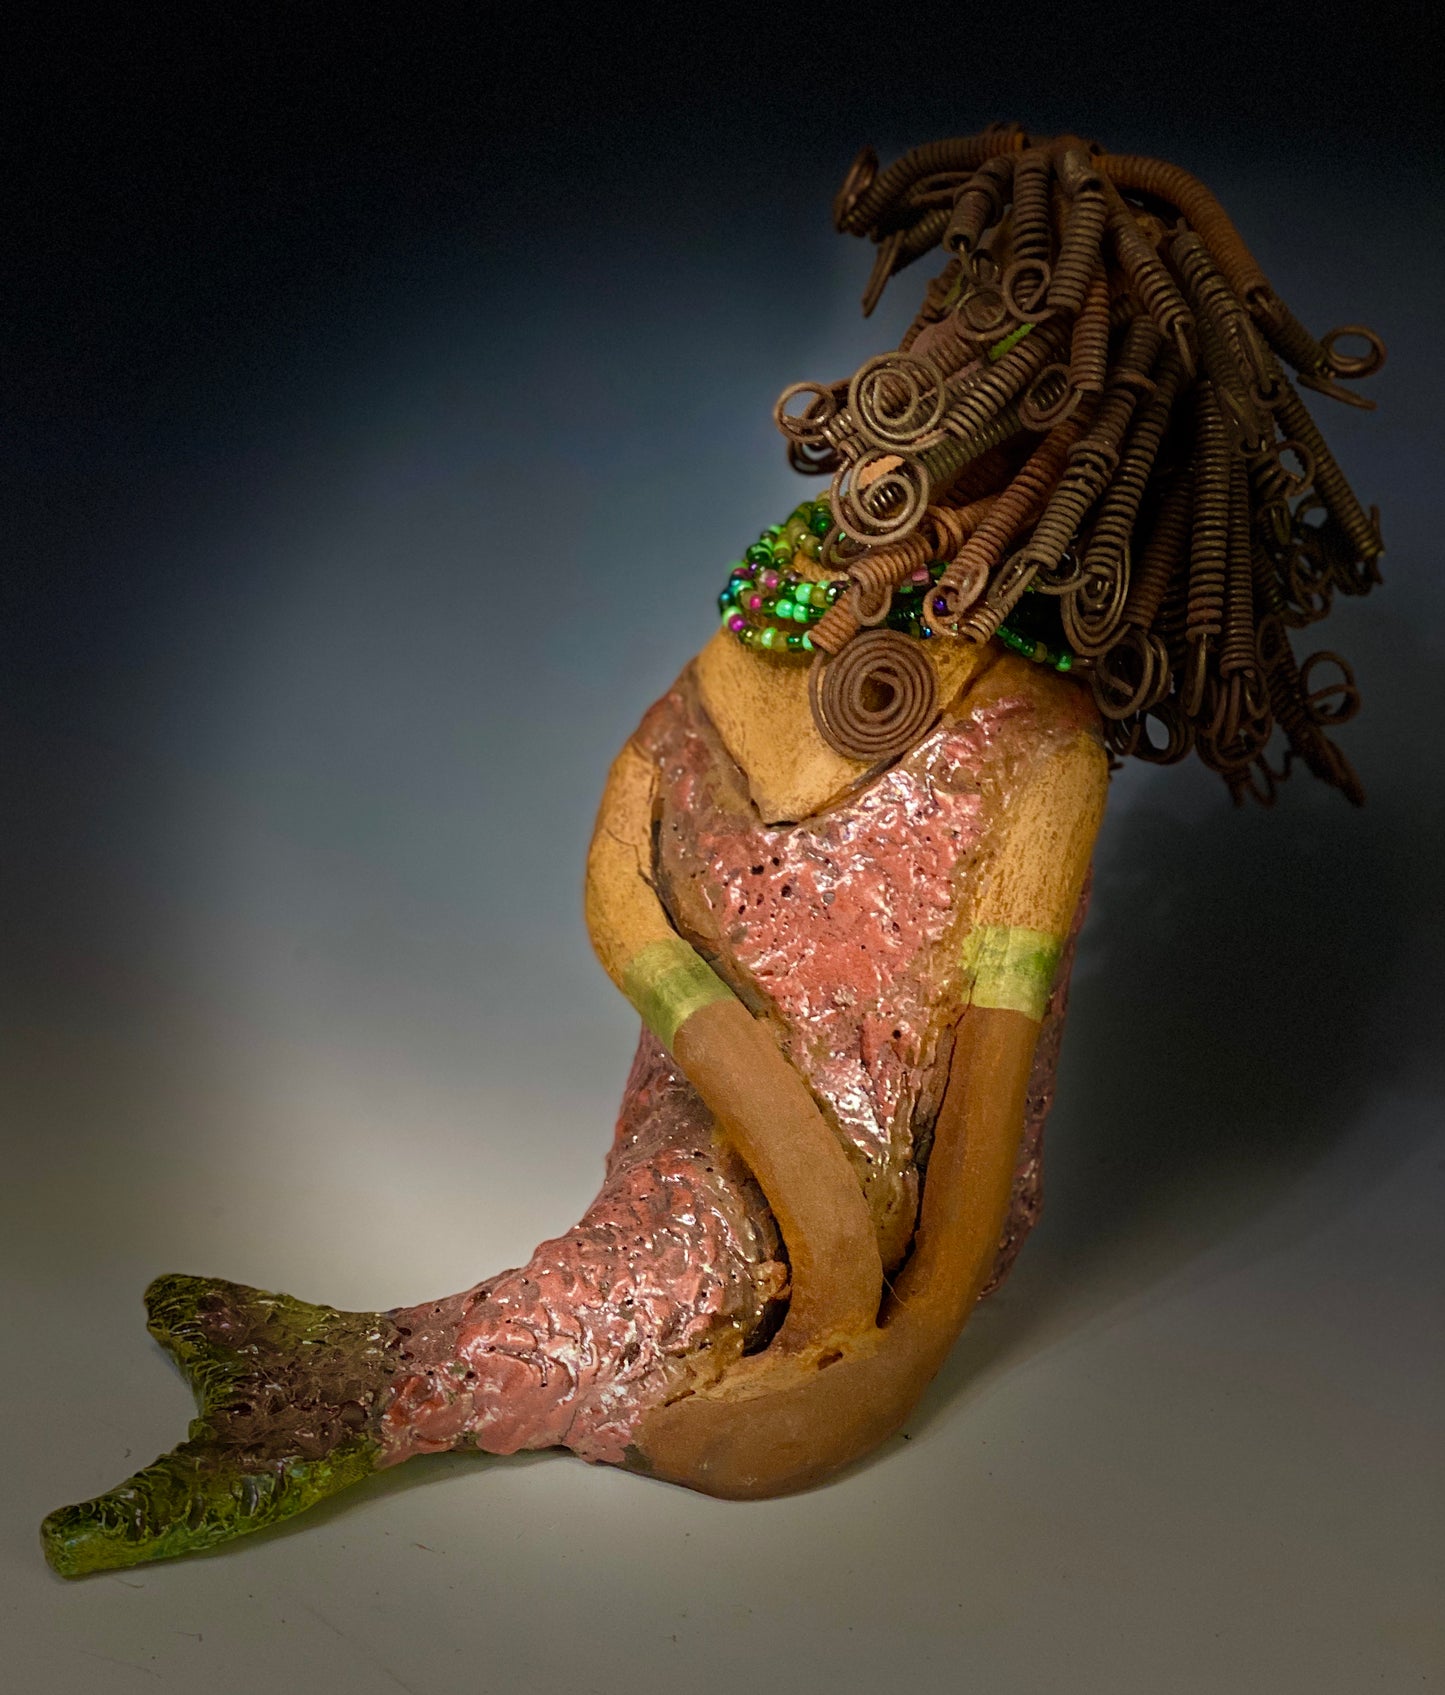 "Honestly, I can not explain where this desire to make mermaids come from. When I created my first raku fired mermaid, I was amazed at how well my homemade metallic copper green glaze worked with the mermaid's body suit. It was a good match with the honey brown complexion I use with most of my sculptures".  Compare Meranda with Melody the mermaid.